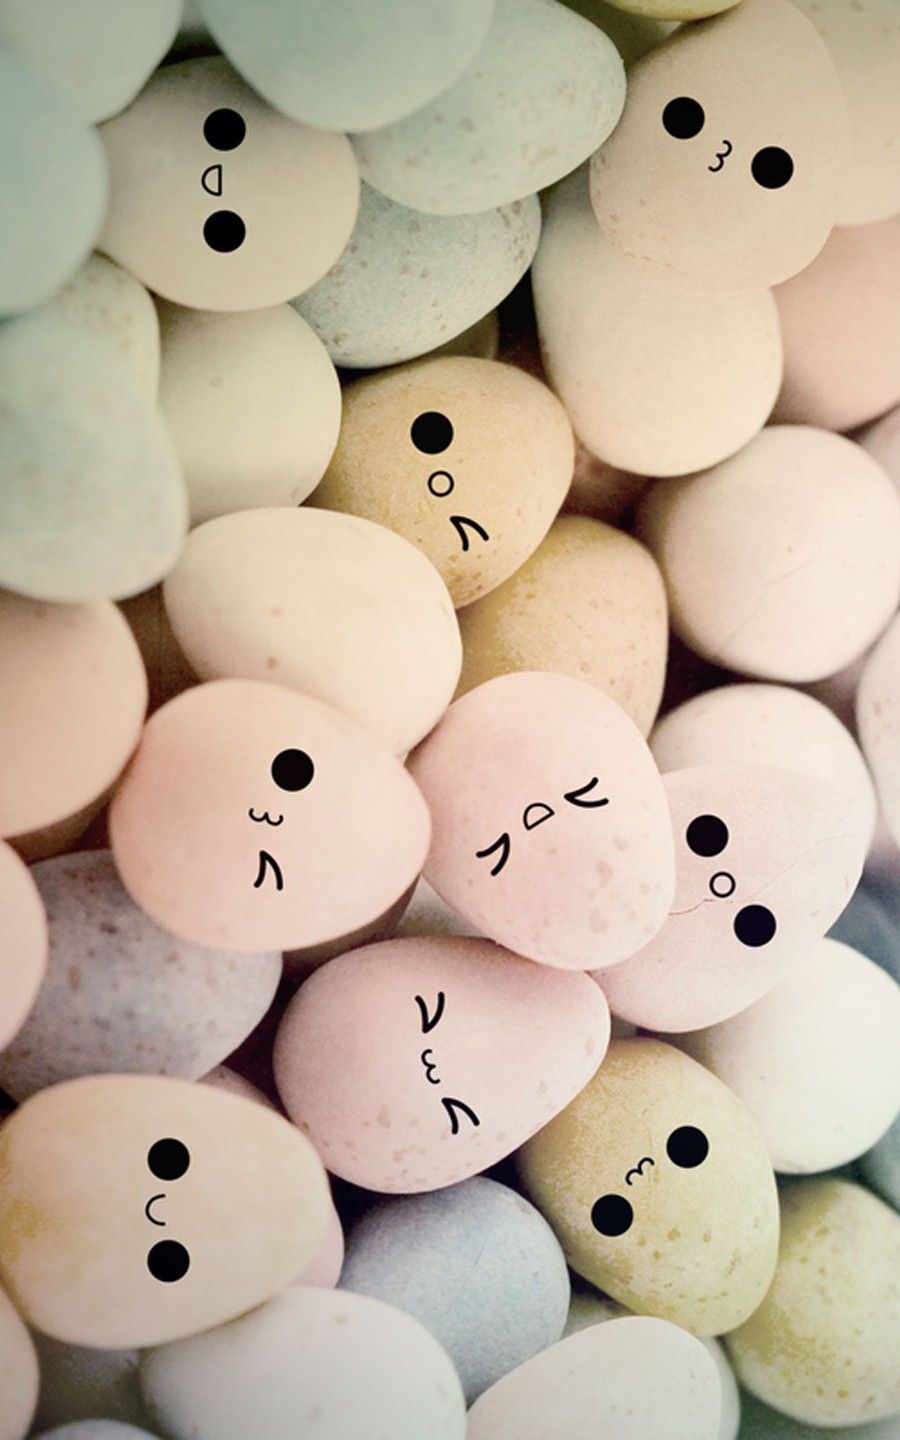 Cute Eggs With Faces iPhone Wallpaper 3D iPhone Wallpaper